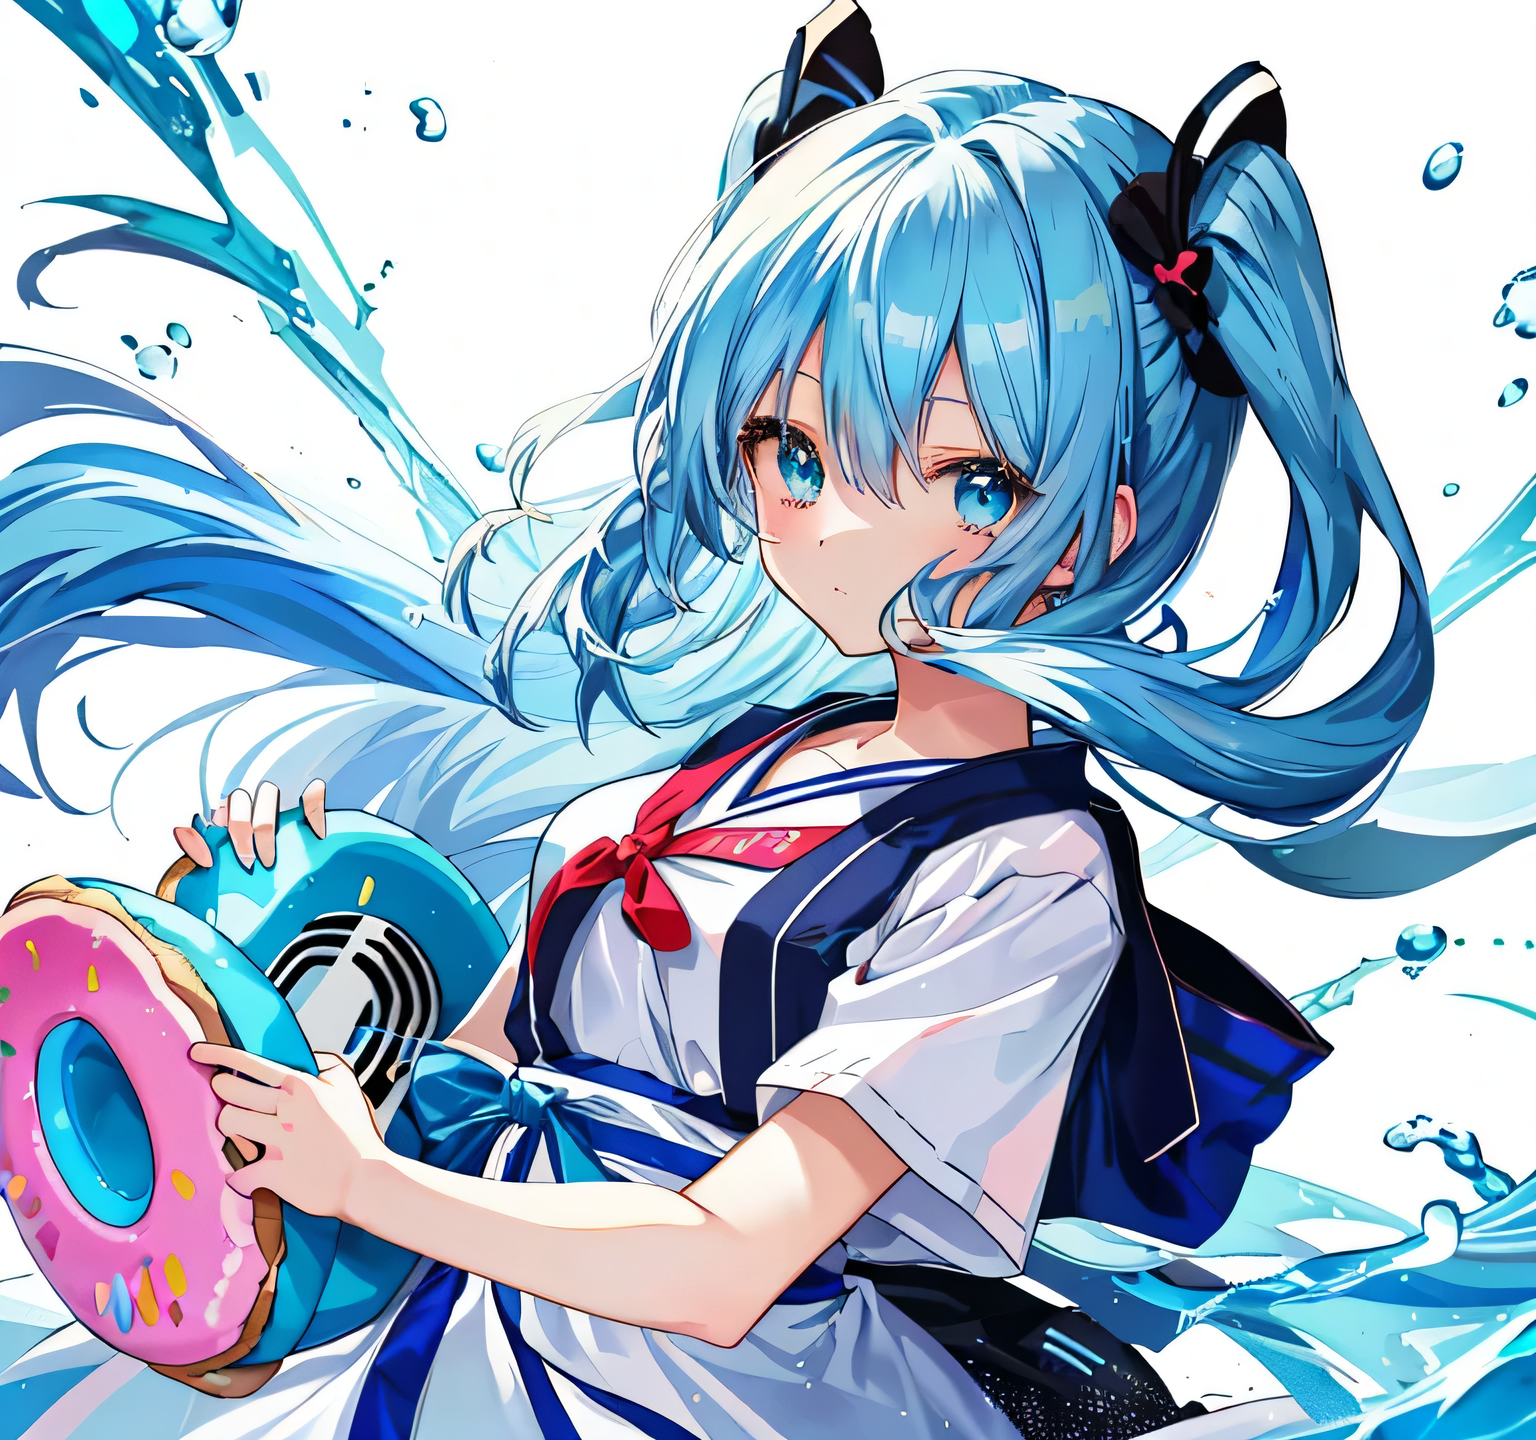 Anime girl with blue hair and blue eyes holding a donut, she has a cute expressive face, Young anime girl close up, anime Mo artstyle, Screenshot of anime 2 0 1 9, anime image of a cute girl, Tensei Shitara Slime Datta Ken, cute anime face, Anime portrait of Cirno, Very cute anime girl face, Fa chyan, mofu mofu, blue hair, cute  like face